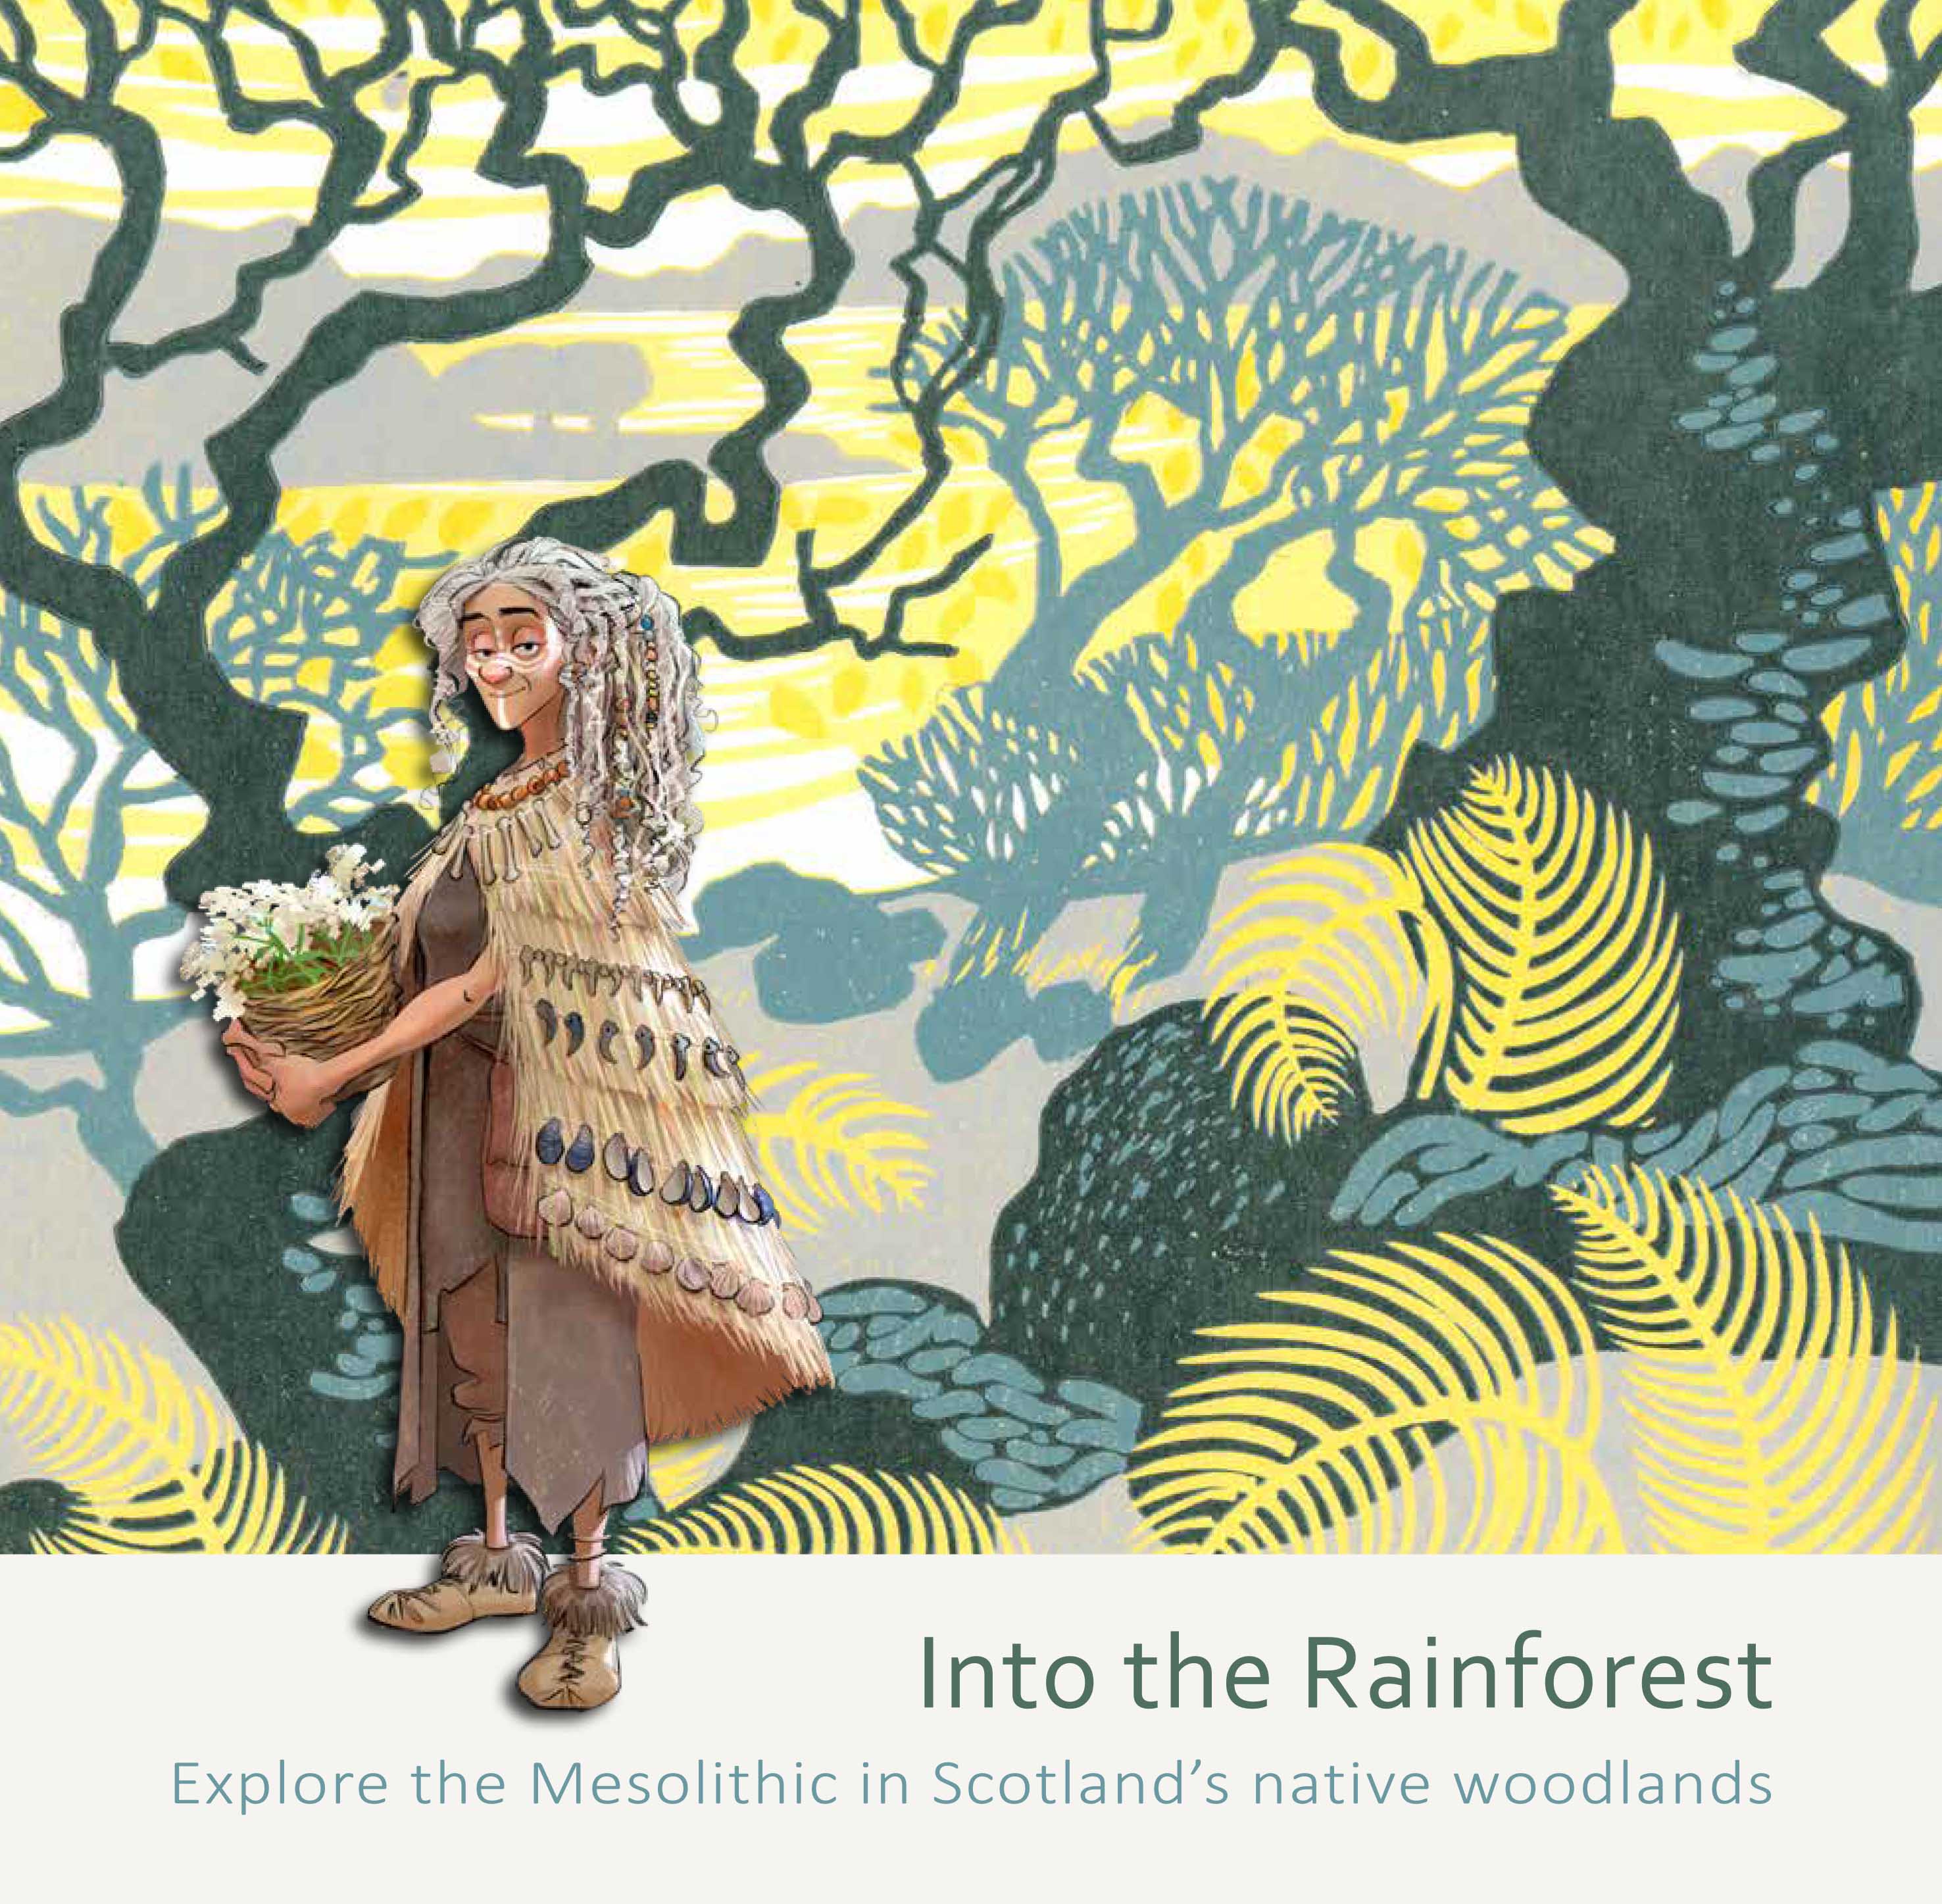 Into the Rainforest booklet front cover featuring older woman carrying a basket.